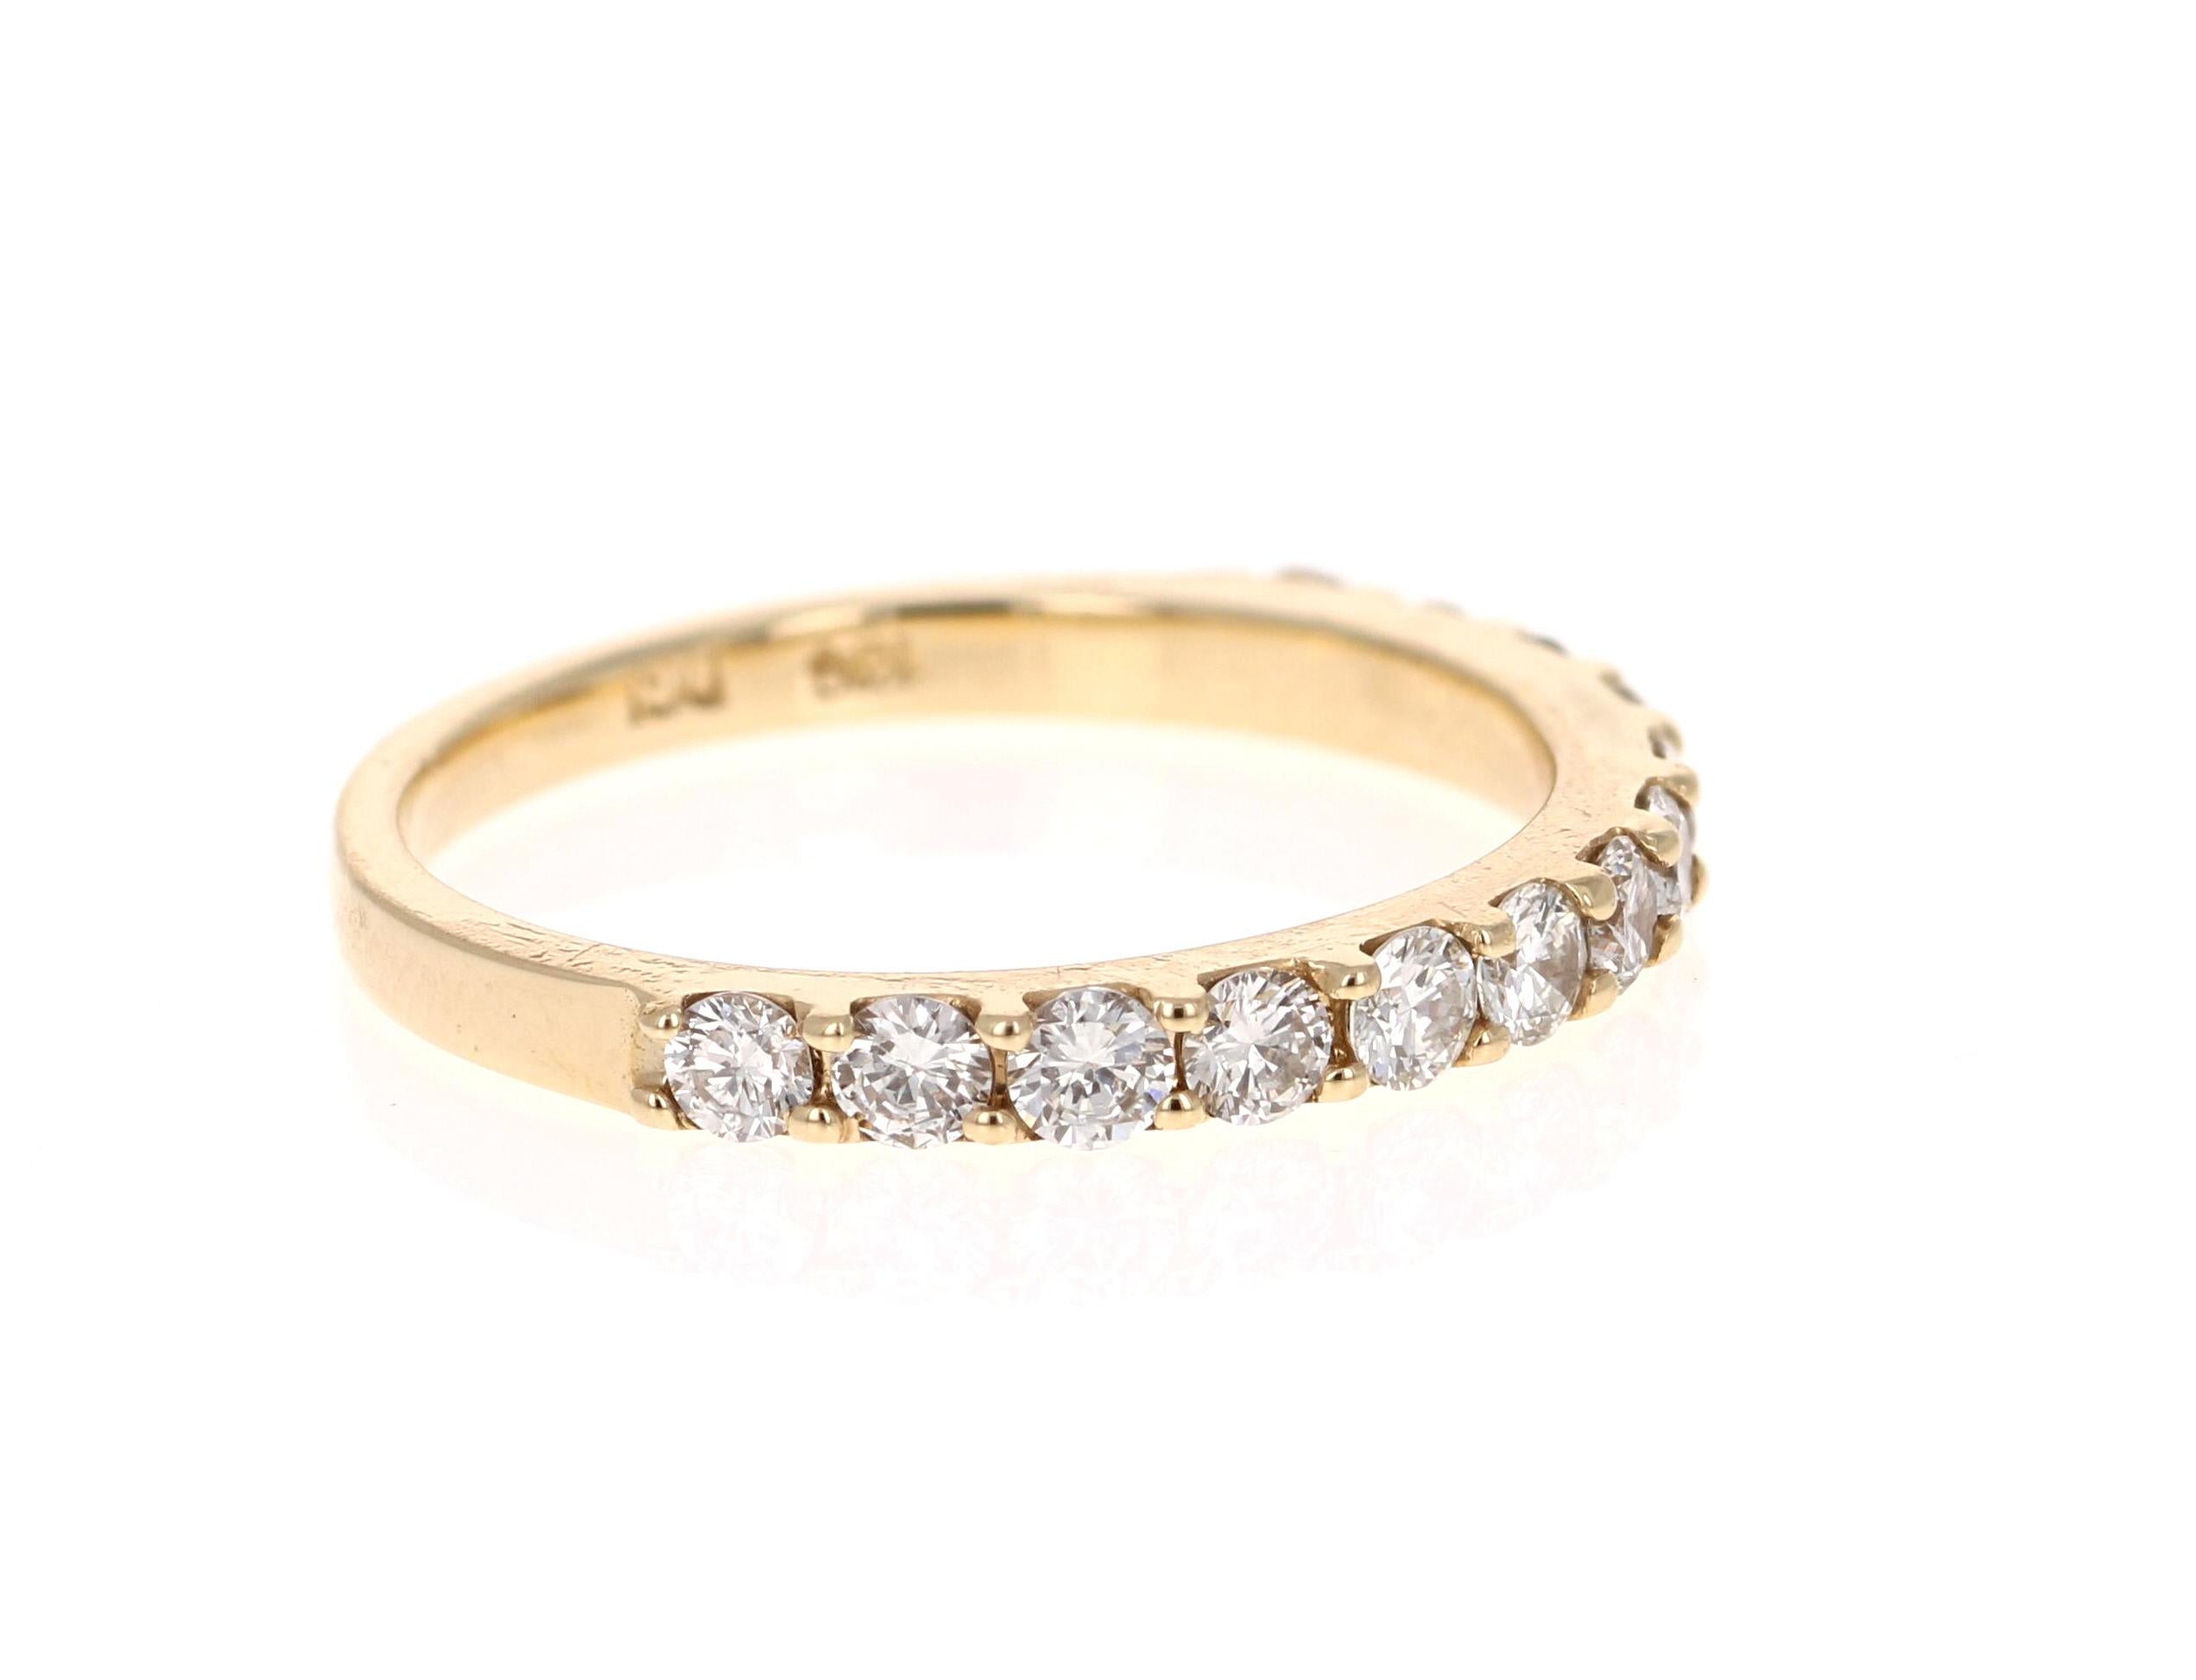 Cute and dainty 0.74 Carat Diamond band that is sure to be a great addition to anyone's accessory collection.   There are 13 Round Cut Diamonds that weigh 0.74 carats.  The total carat weight of the band is 0.74 carats.  The band is made in 14K